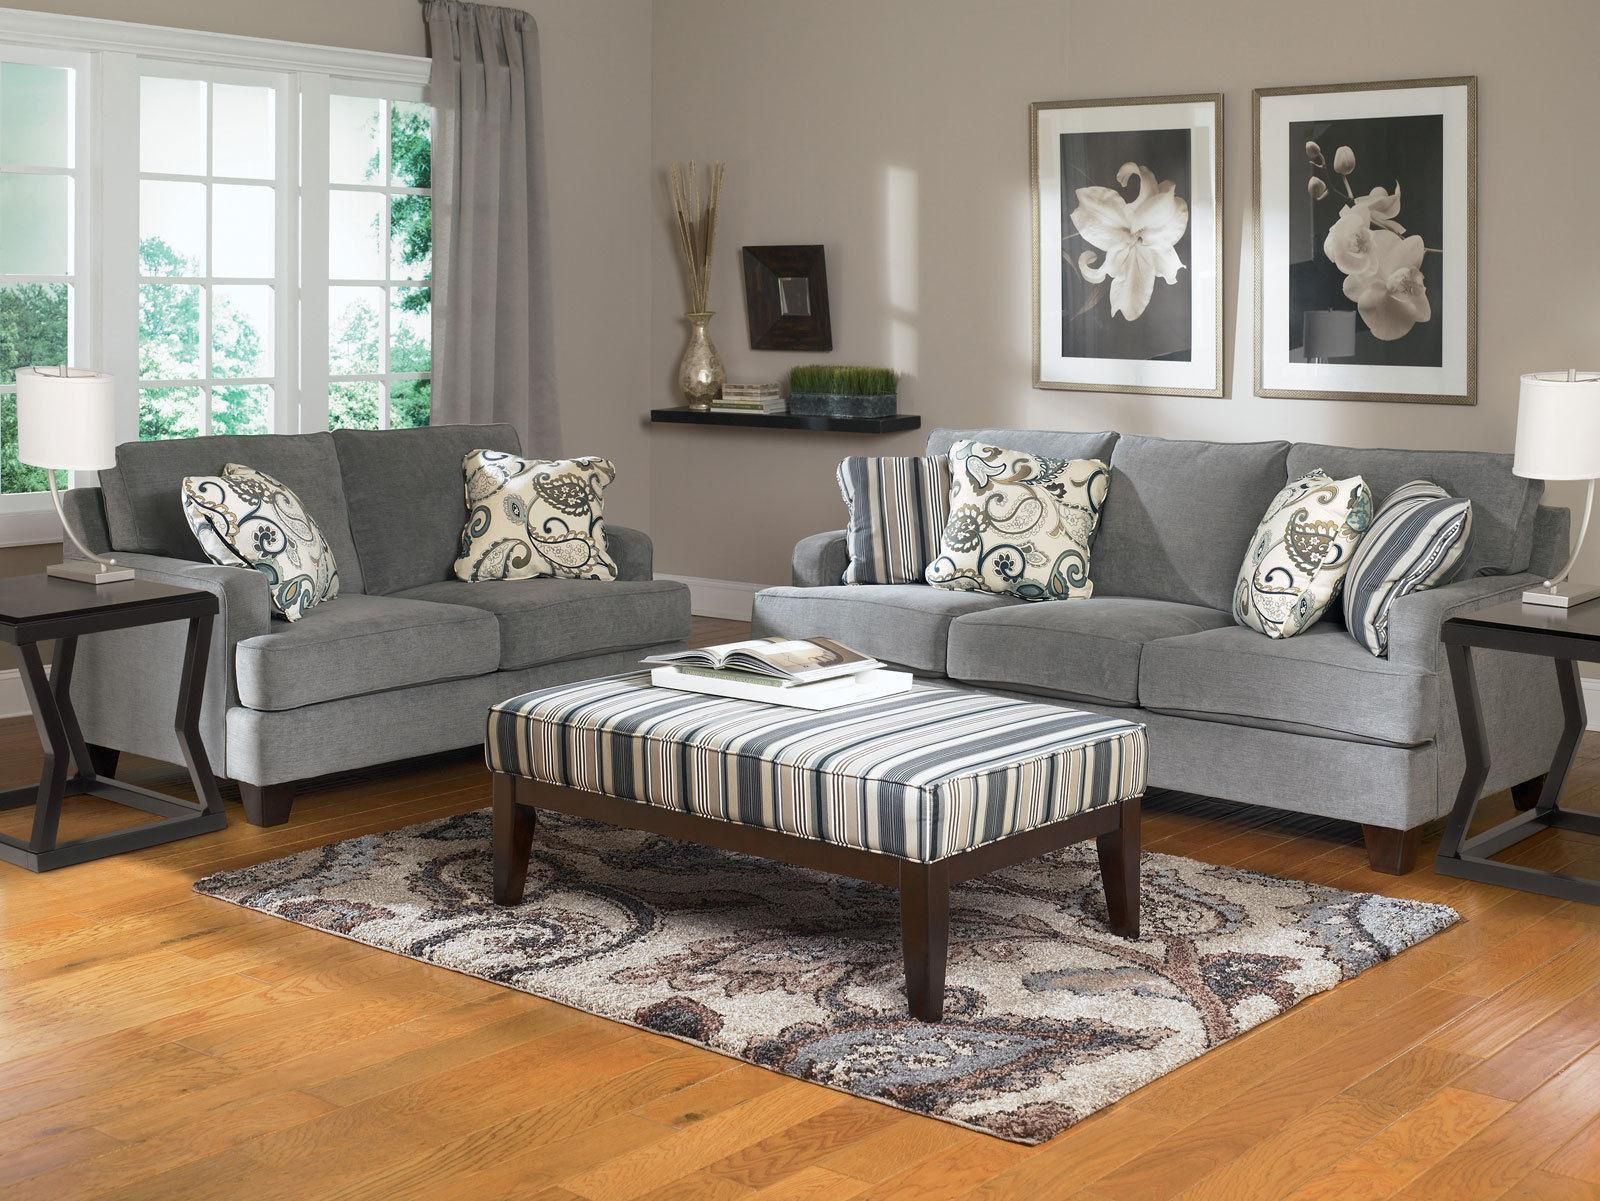 Christie Modern Living Room Furniture Set Gray Microfiber Sofa Couch With Regard To Sofas For Living Rooms (Gallery 17 of 20)